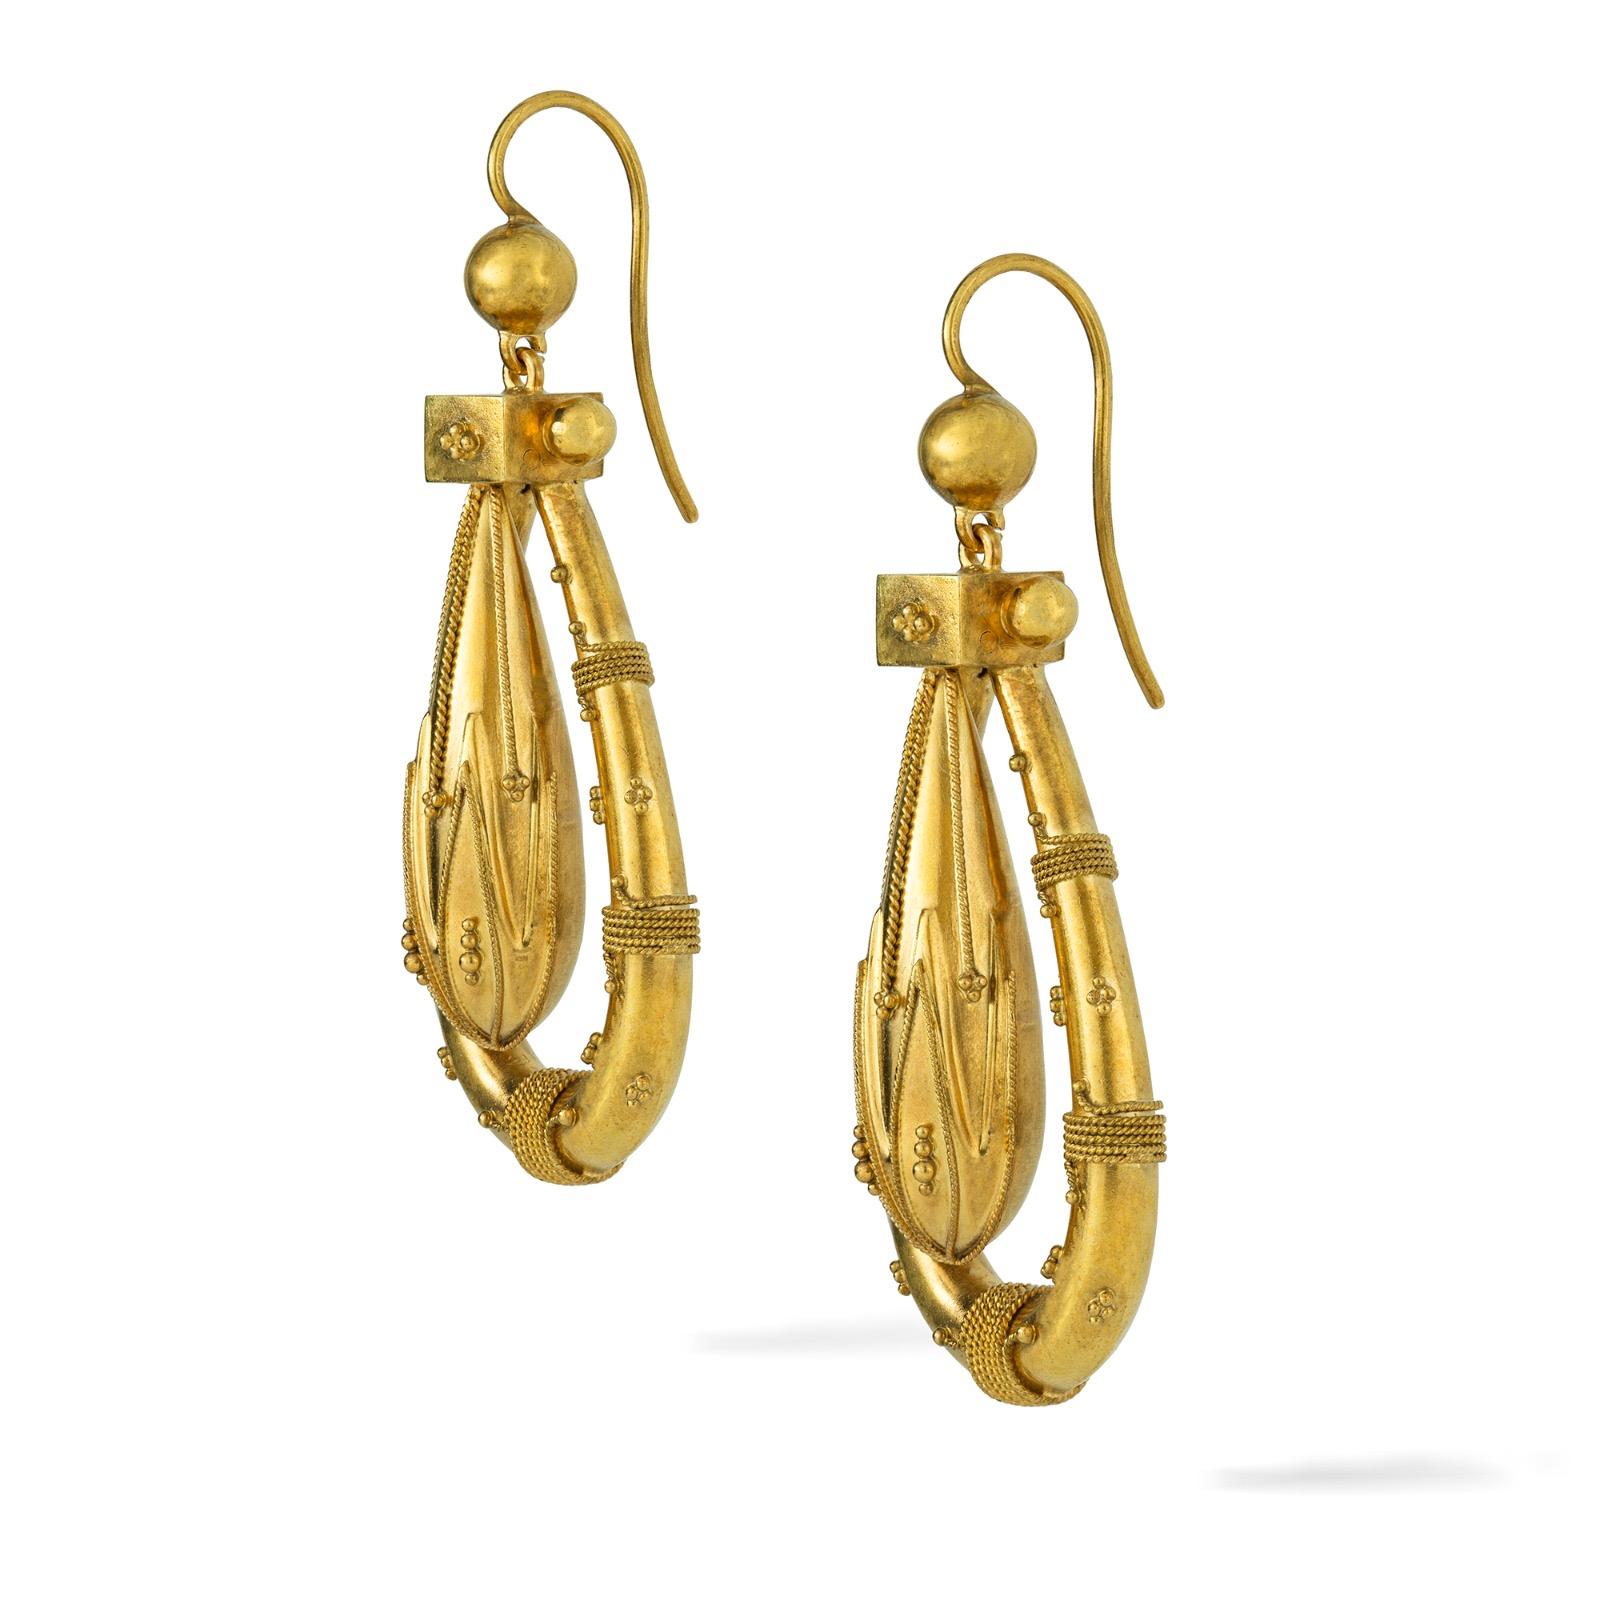 A pair of Victorian Etruscan Revival gold drop earrings, each earring consisting of a pendulum drop centre and golden horseshoe frame, all with a granular bead and wire-work decorations, all suspended by a gold spherical top with wire hook fittings,